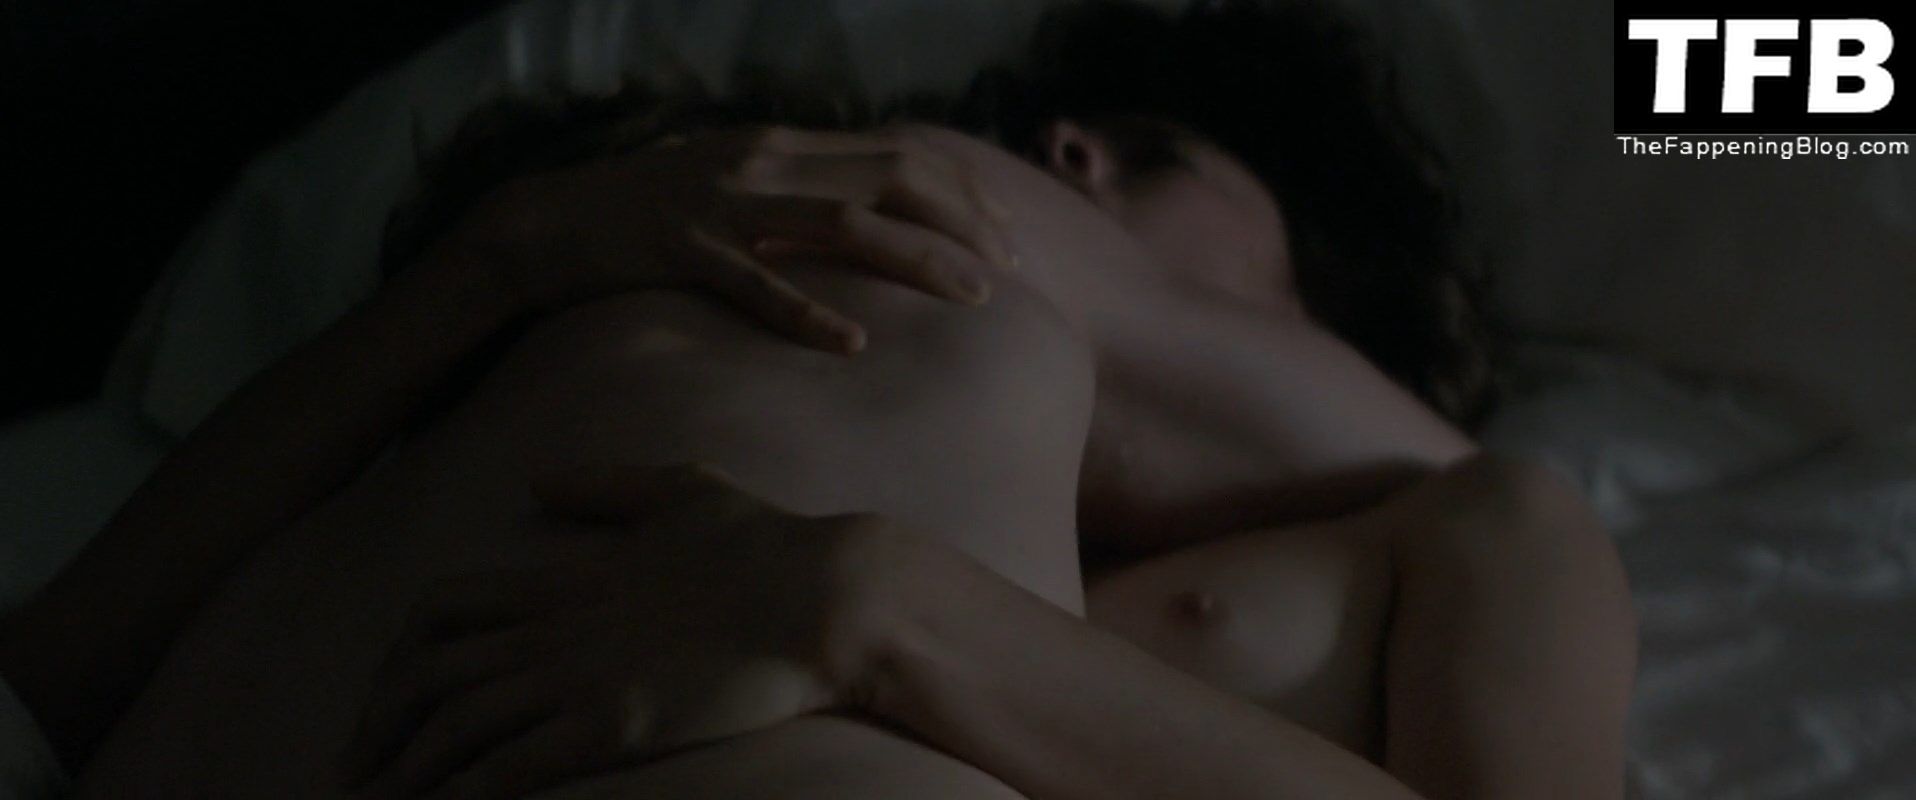 Margaret-Qualley-Nude-Sexy-Stars-at-Noon-The-Fappening-Blog-3.jpg